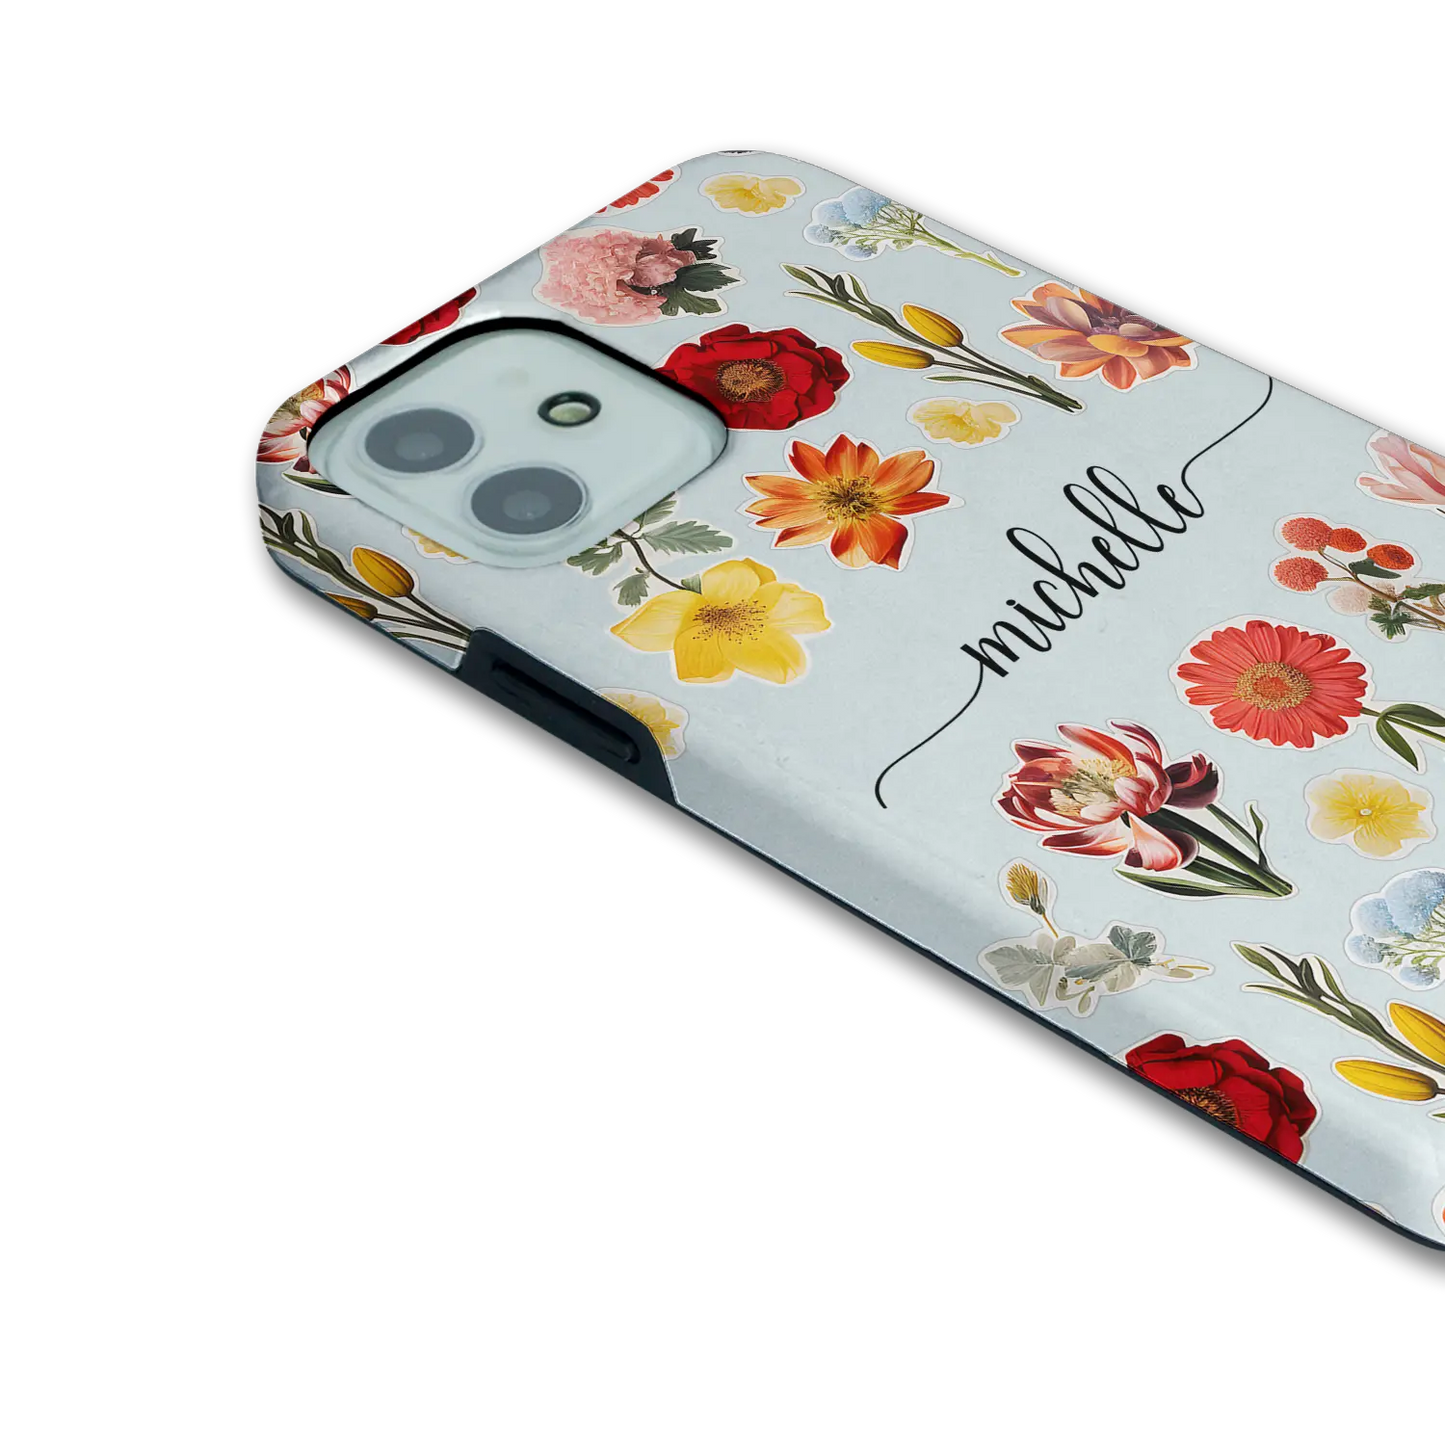 Flower Stickers - Personalised iPhone Case